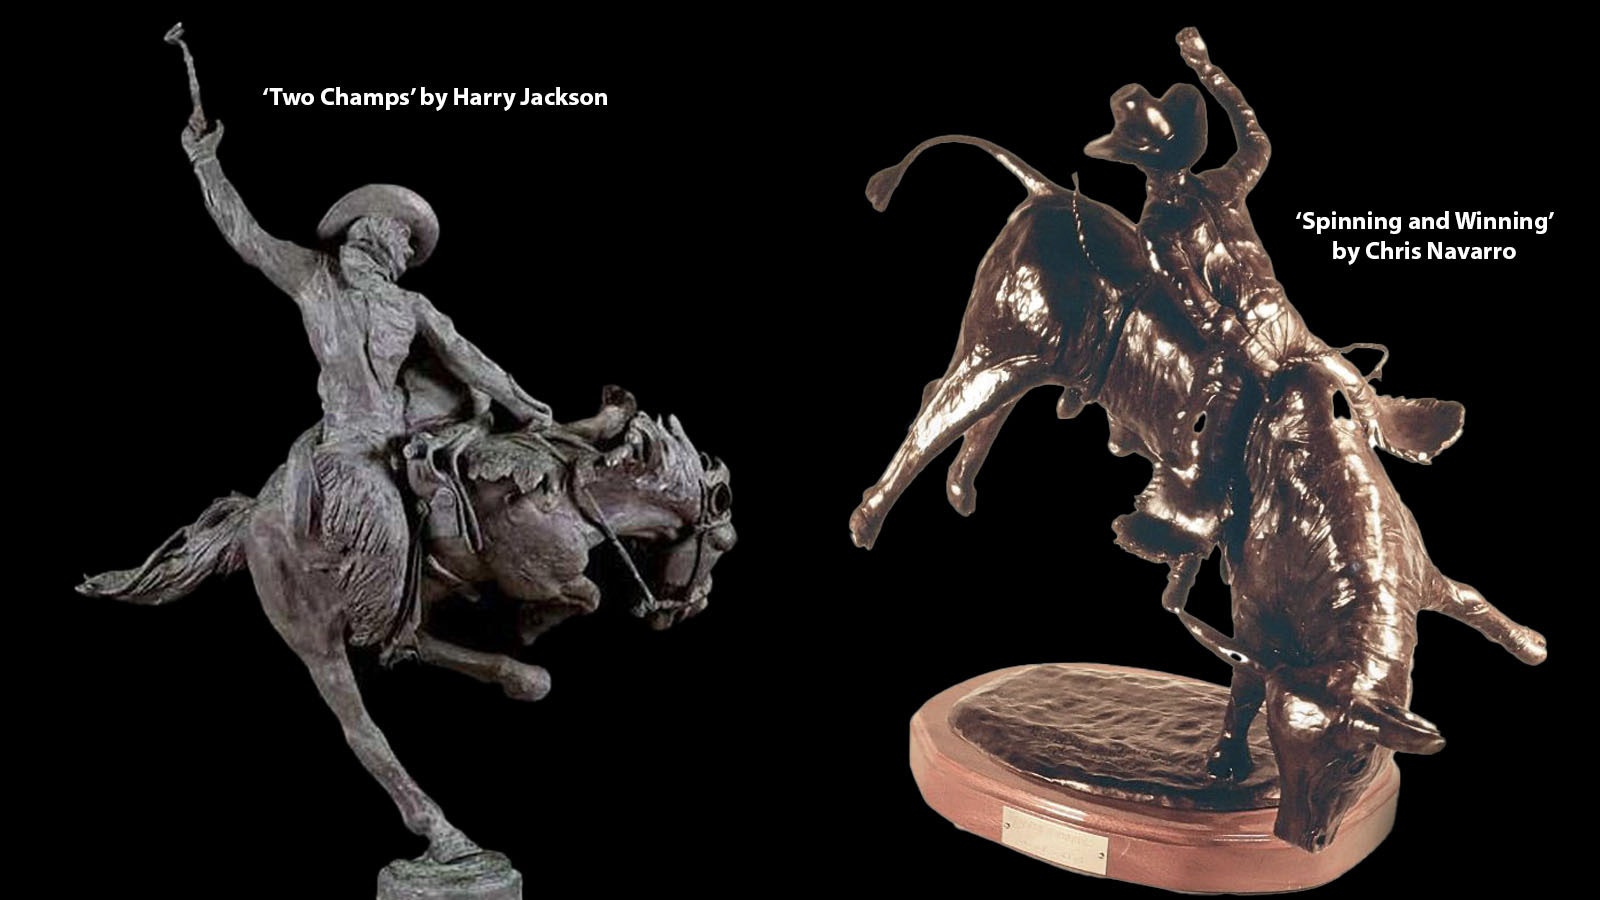 Harry Jackson's sculpture "Two Champs" featuring famous rodeo bronc Steamboat, left, inspired Chris Navarro's desire to become an artist. His first sculpture was "Spinning and Winning" in 1980, right.